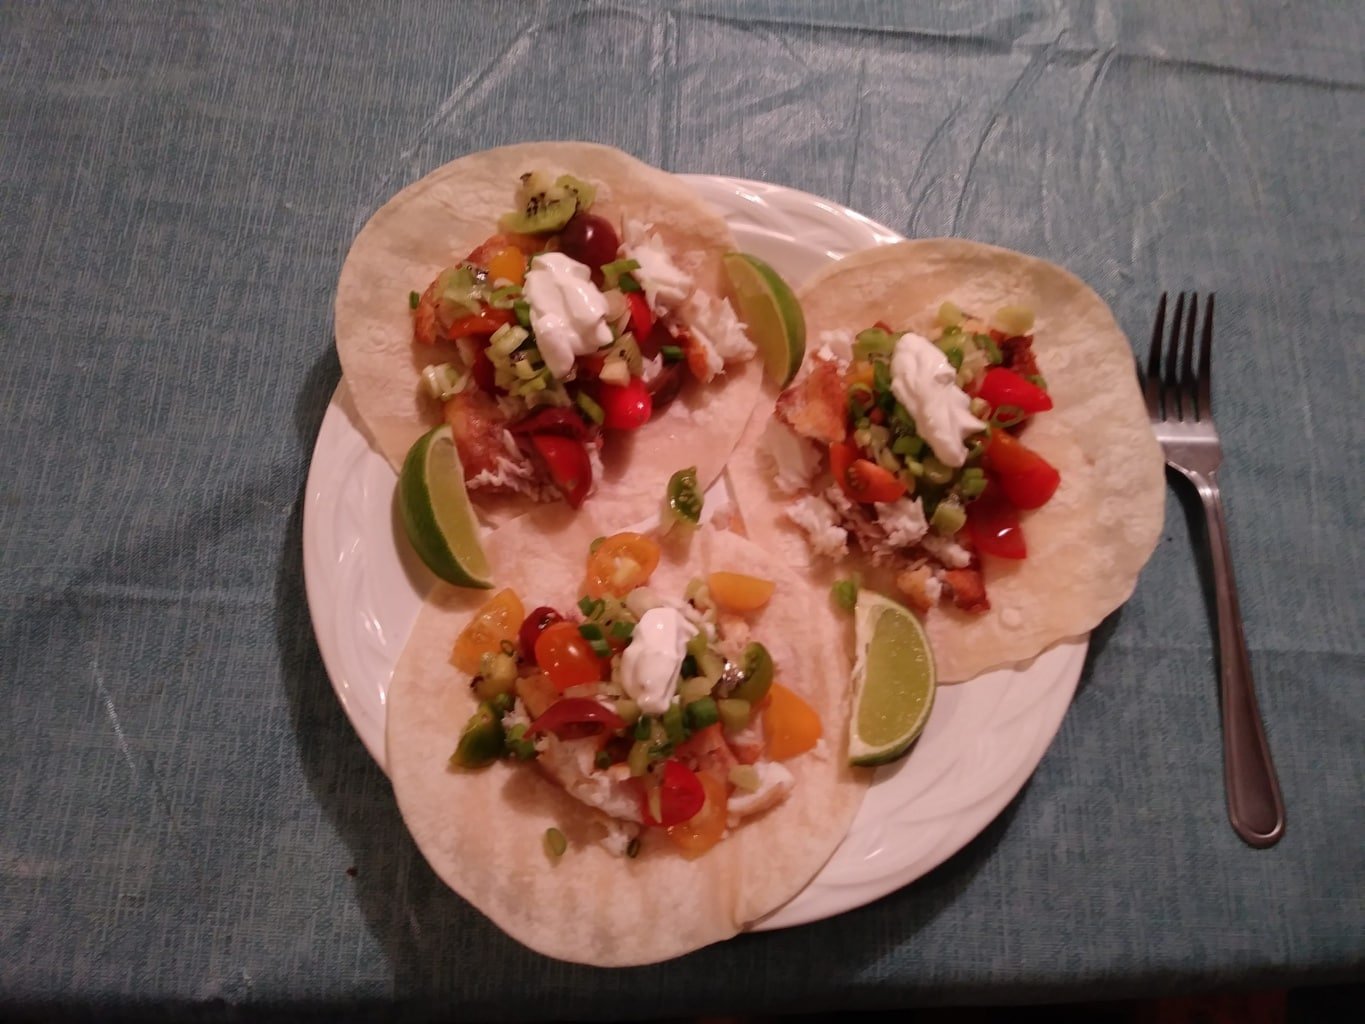 Tilapia Tacos in Our New Home